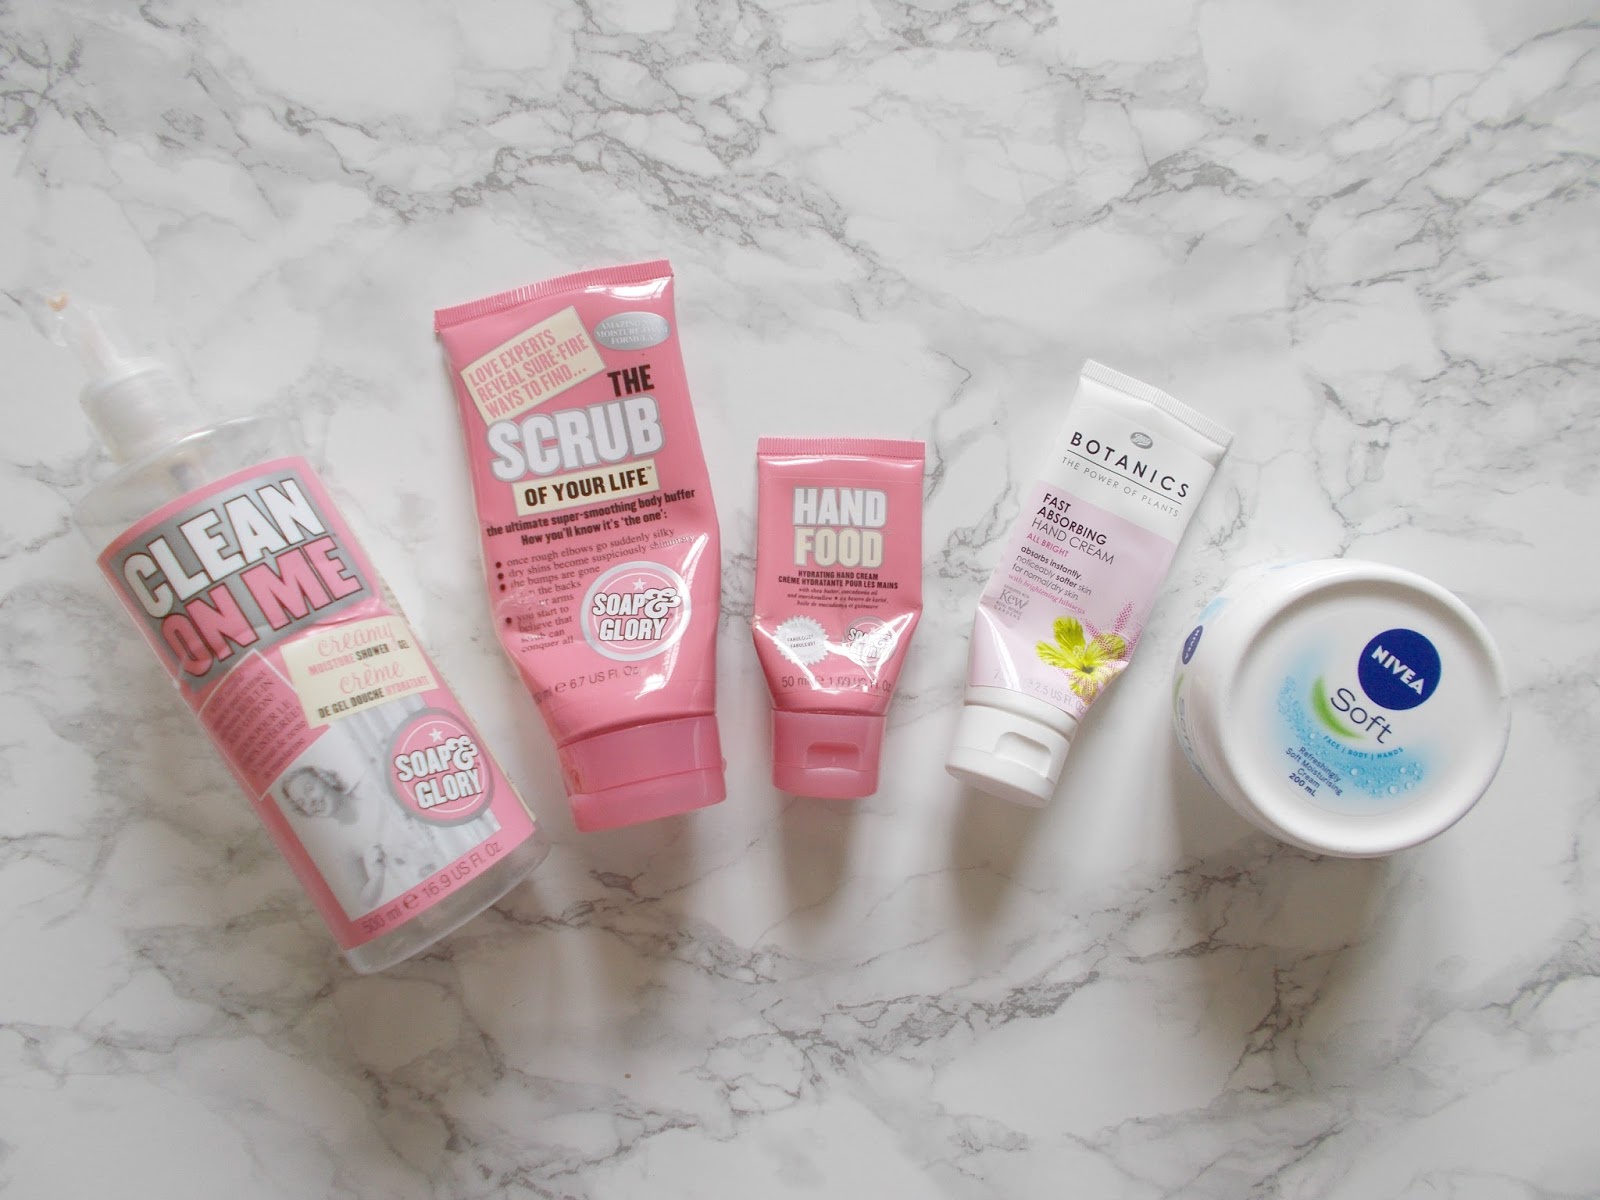 bodycare empties review soap and glory clean on me scrub of your life hand food botanics hnd cream nivea soft